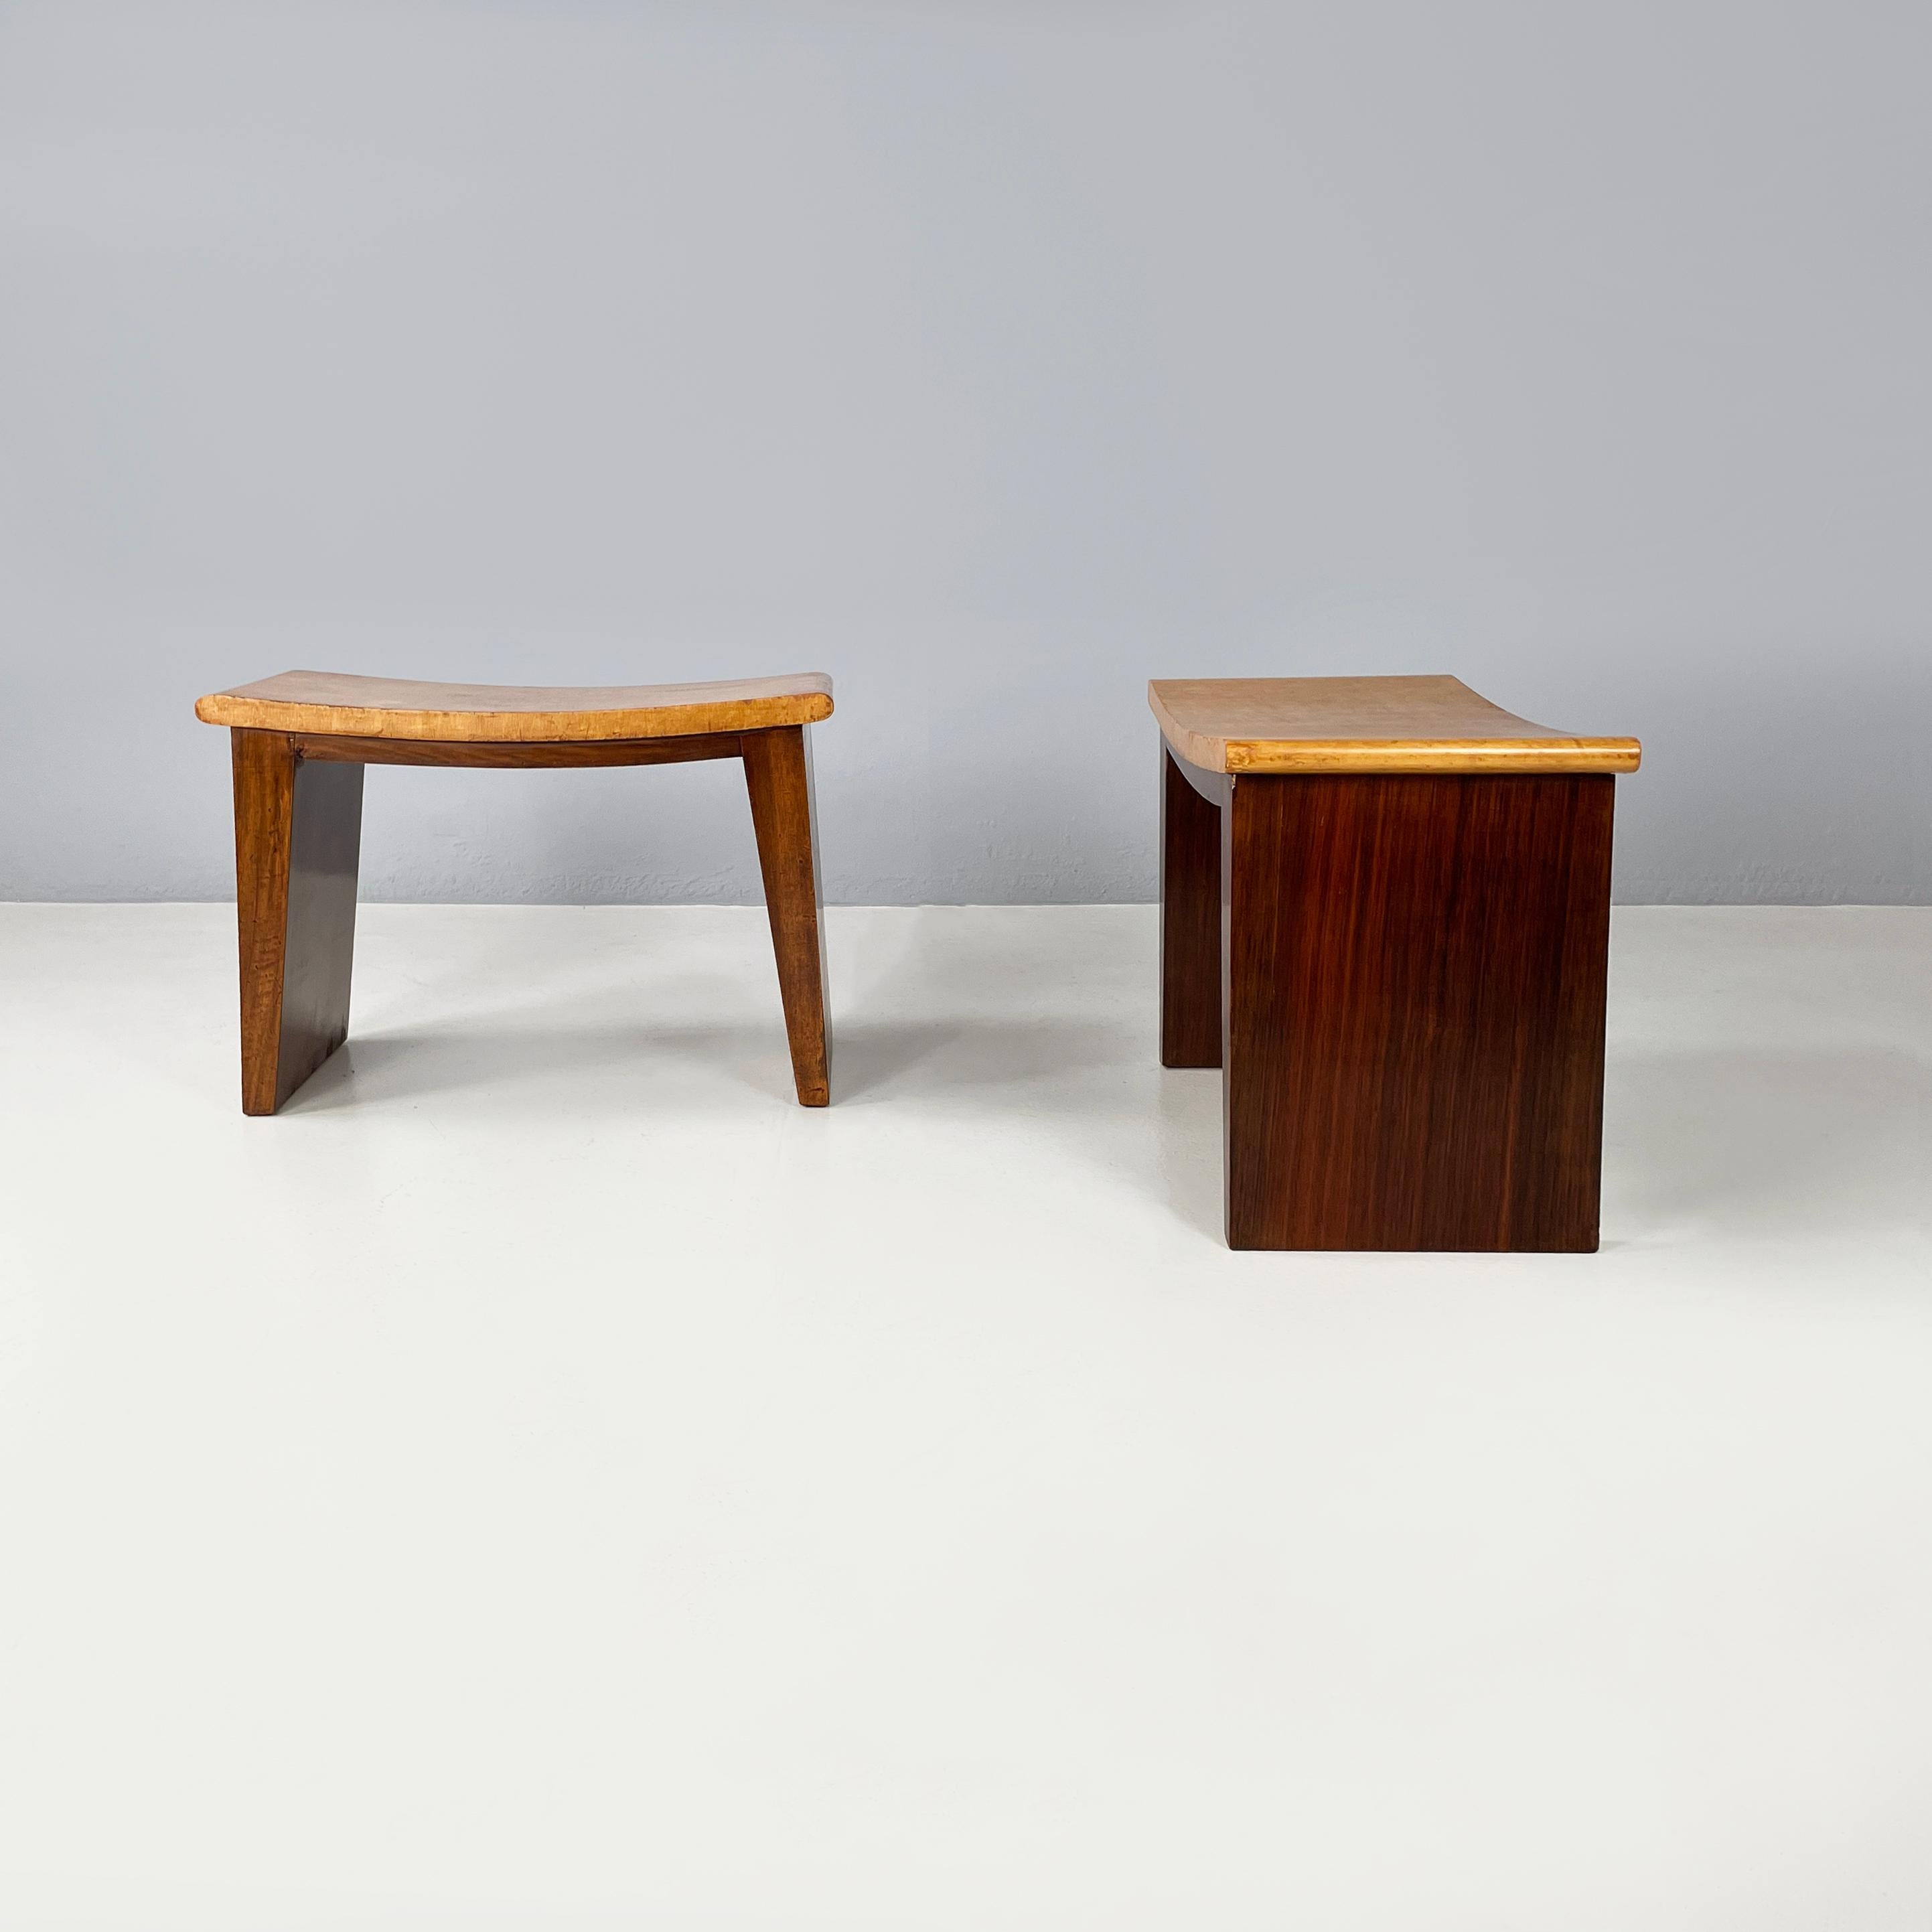 Italian art deco Stools in light and dark wood, 1940s
Pair of wooden stools. The light wood seat is slightly curved and has two lateral rounded edges. The 2 dark wooden legs tend to widen towards the base. From Art Deco period.
1940s.
Good